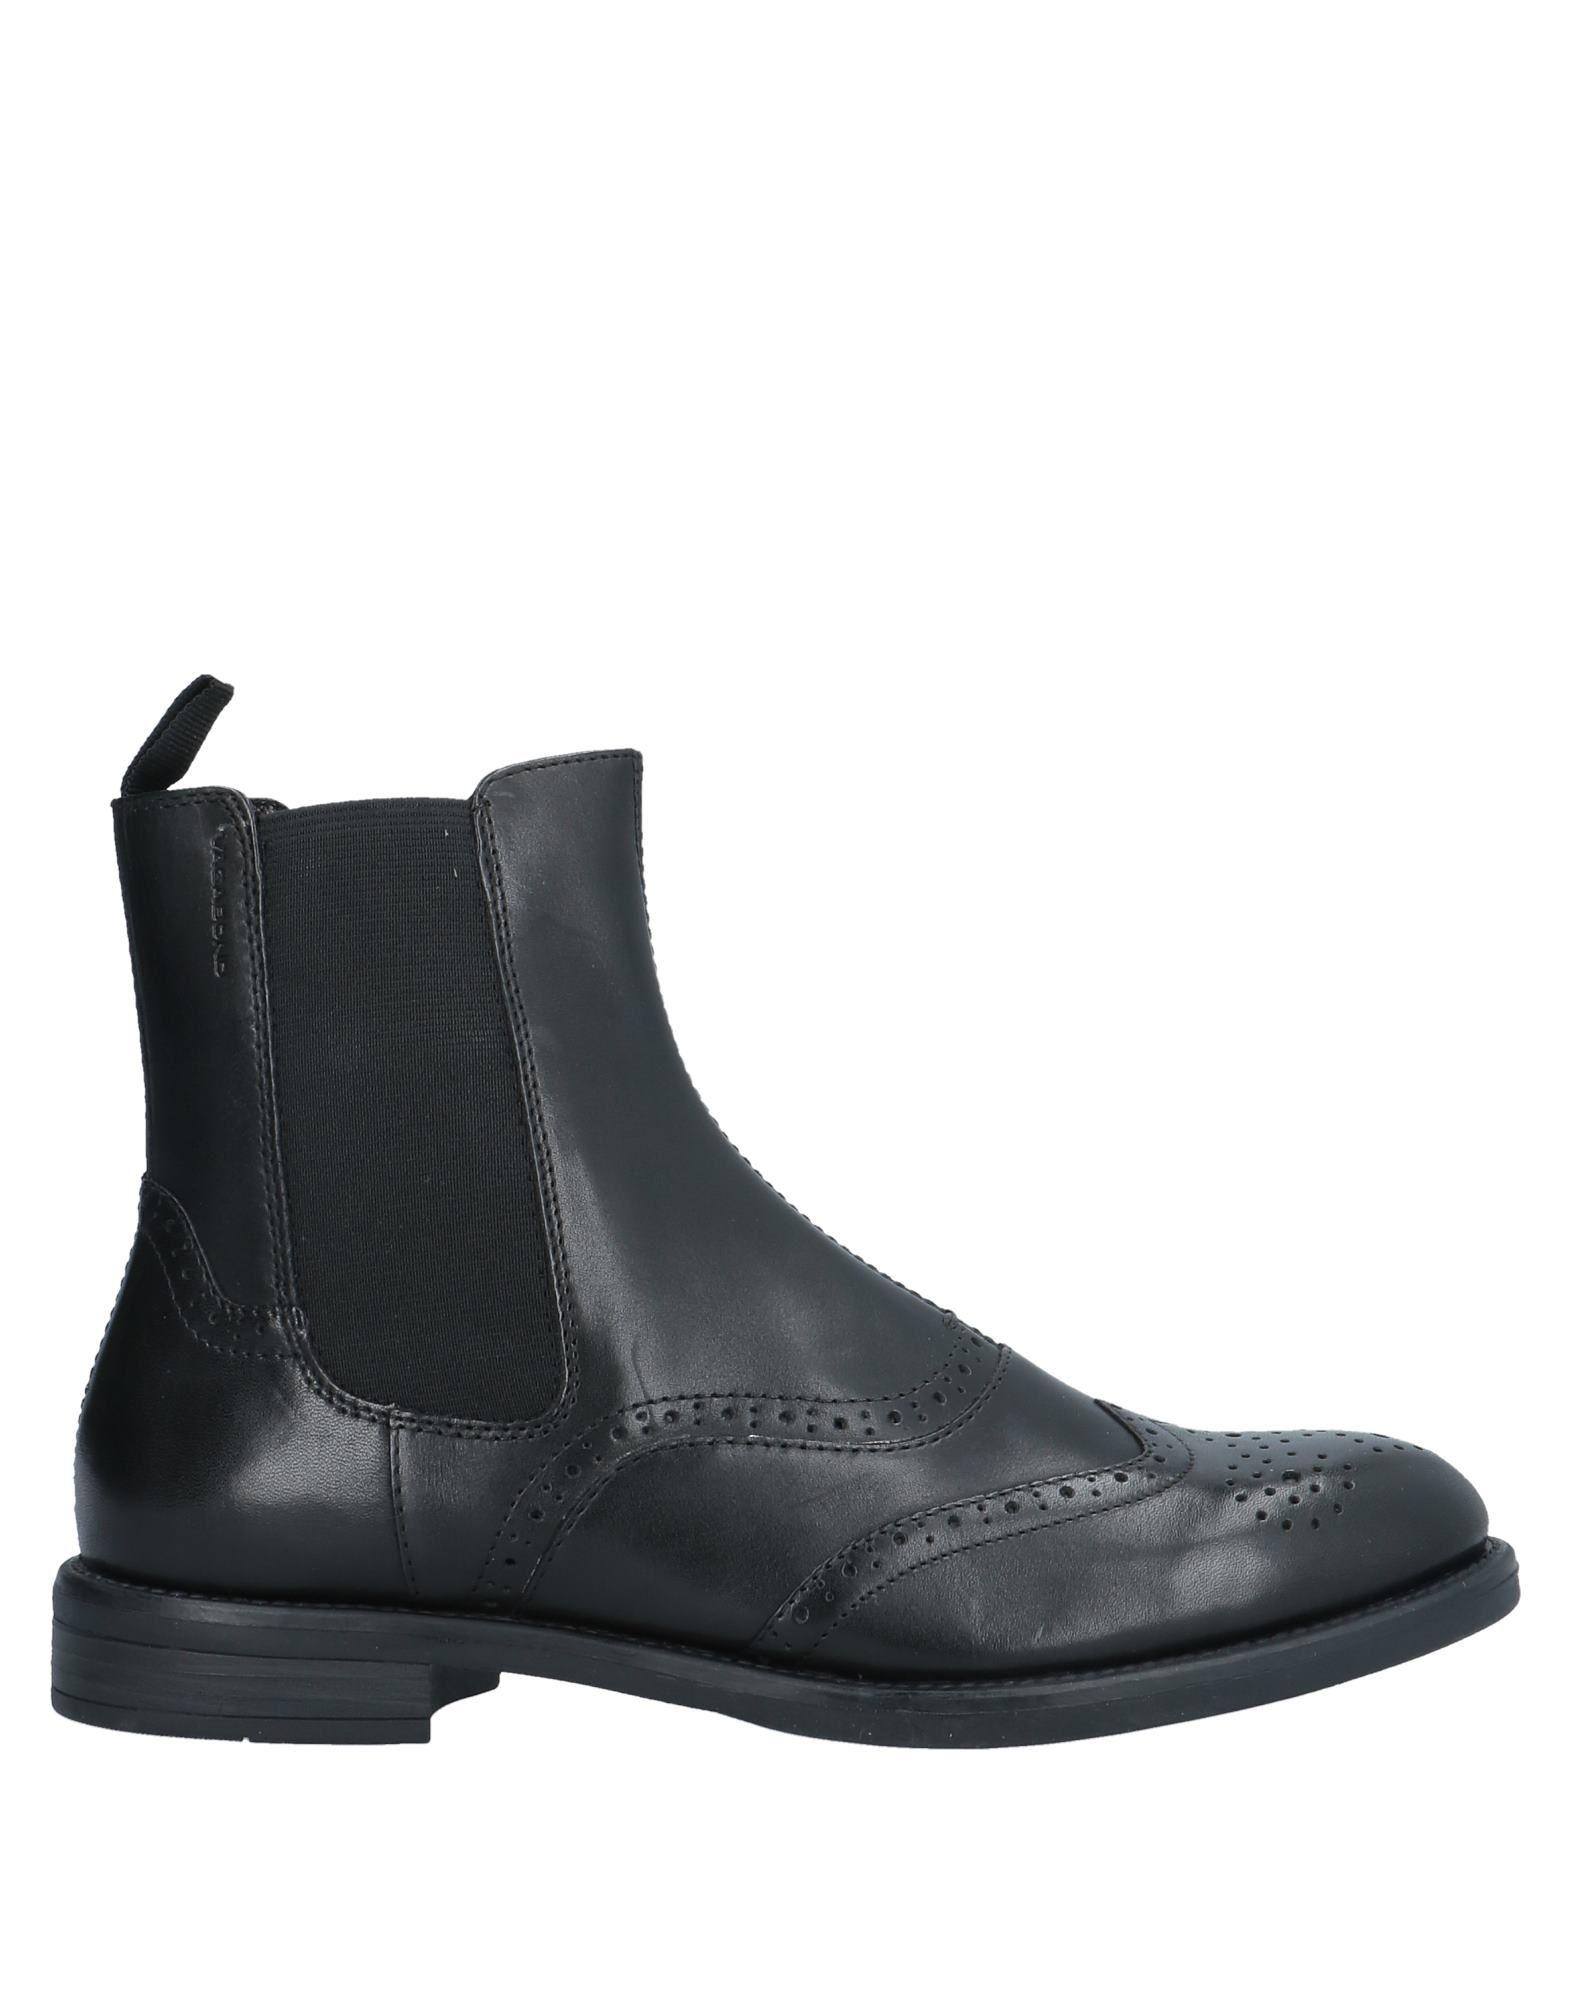 Vagabond Ankle Boots in Black - Lyst